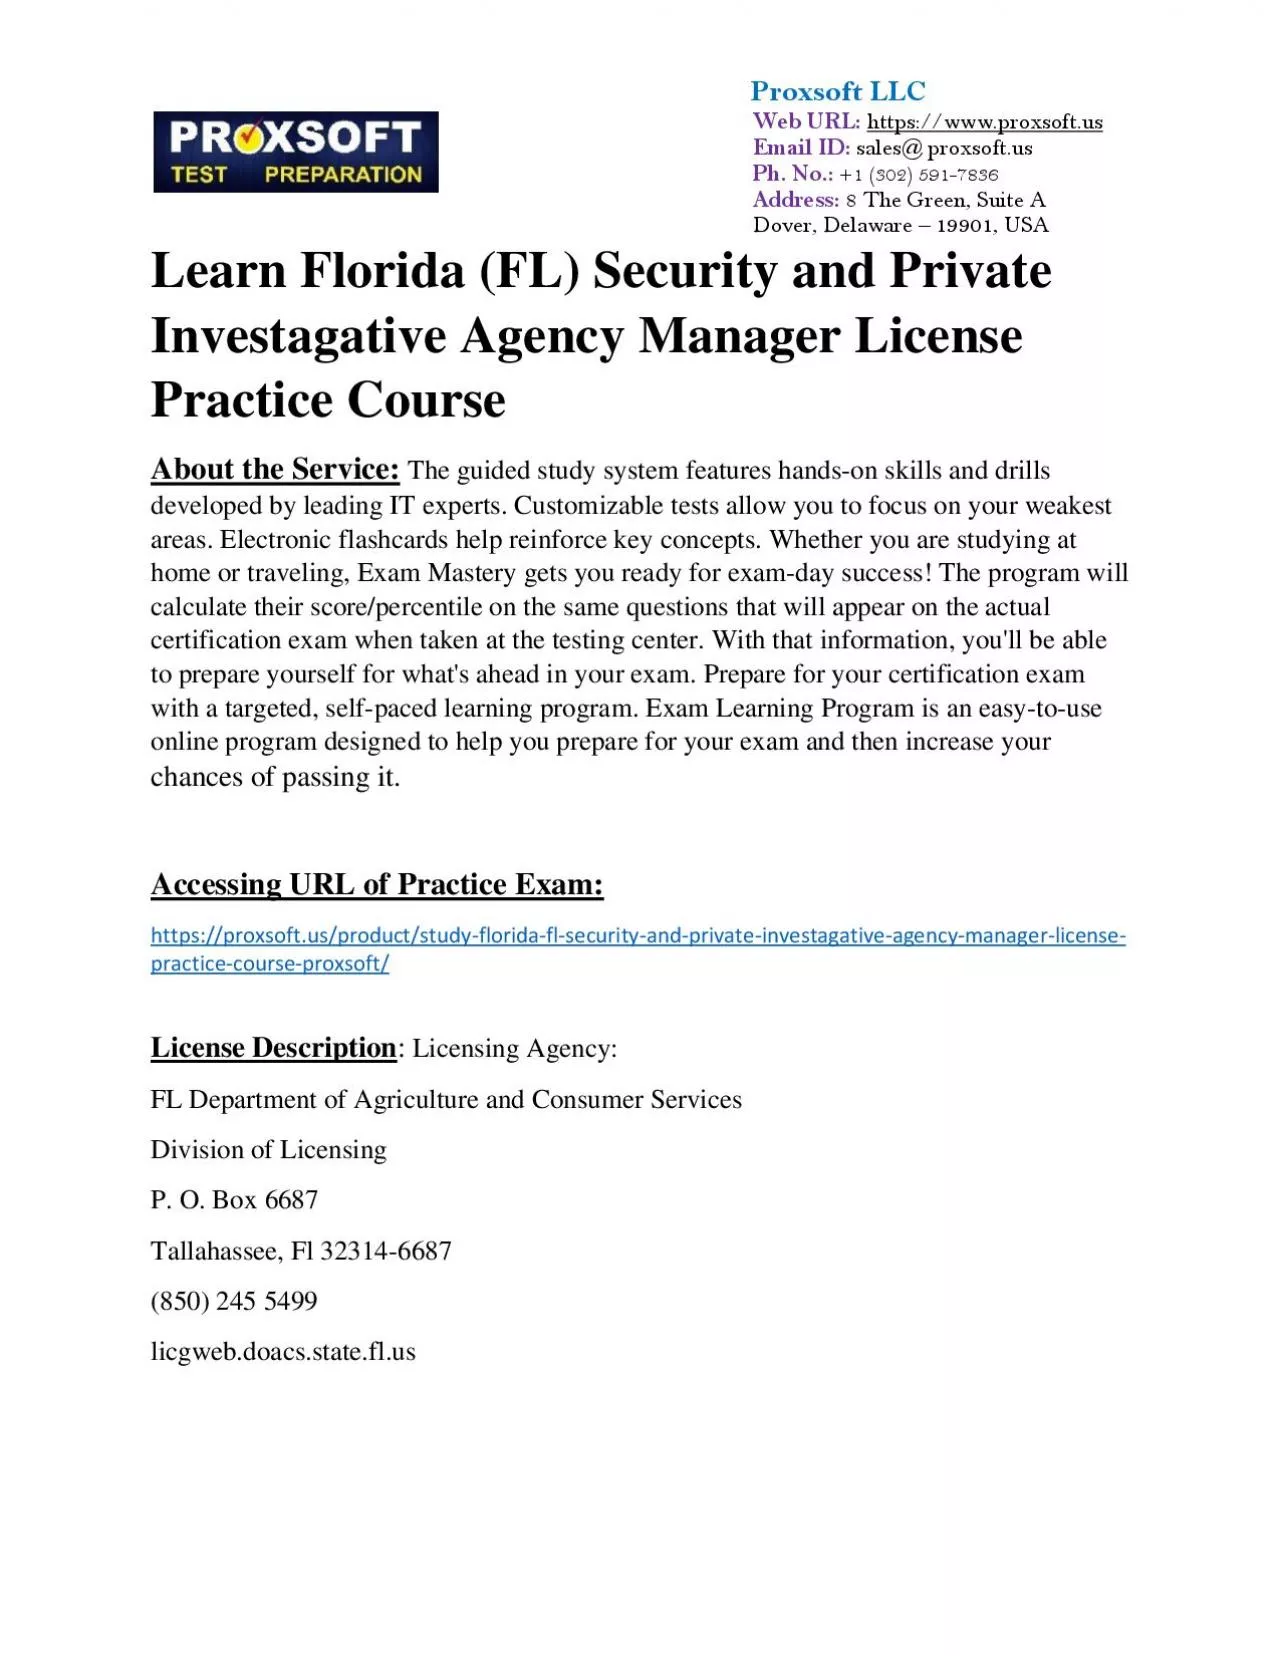 Learn Florida (FL) Security and Private Investagative Agency Manager License Practice